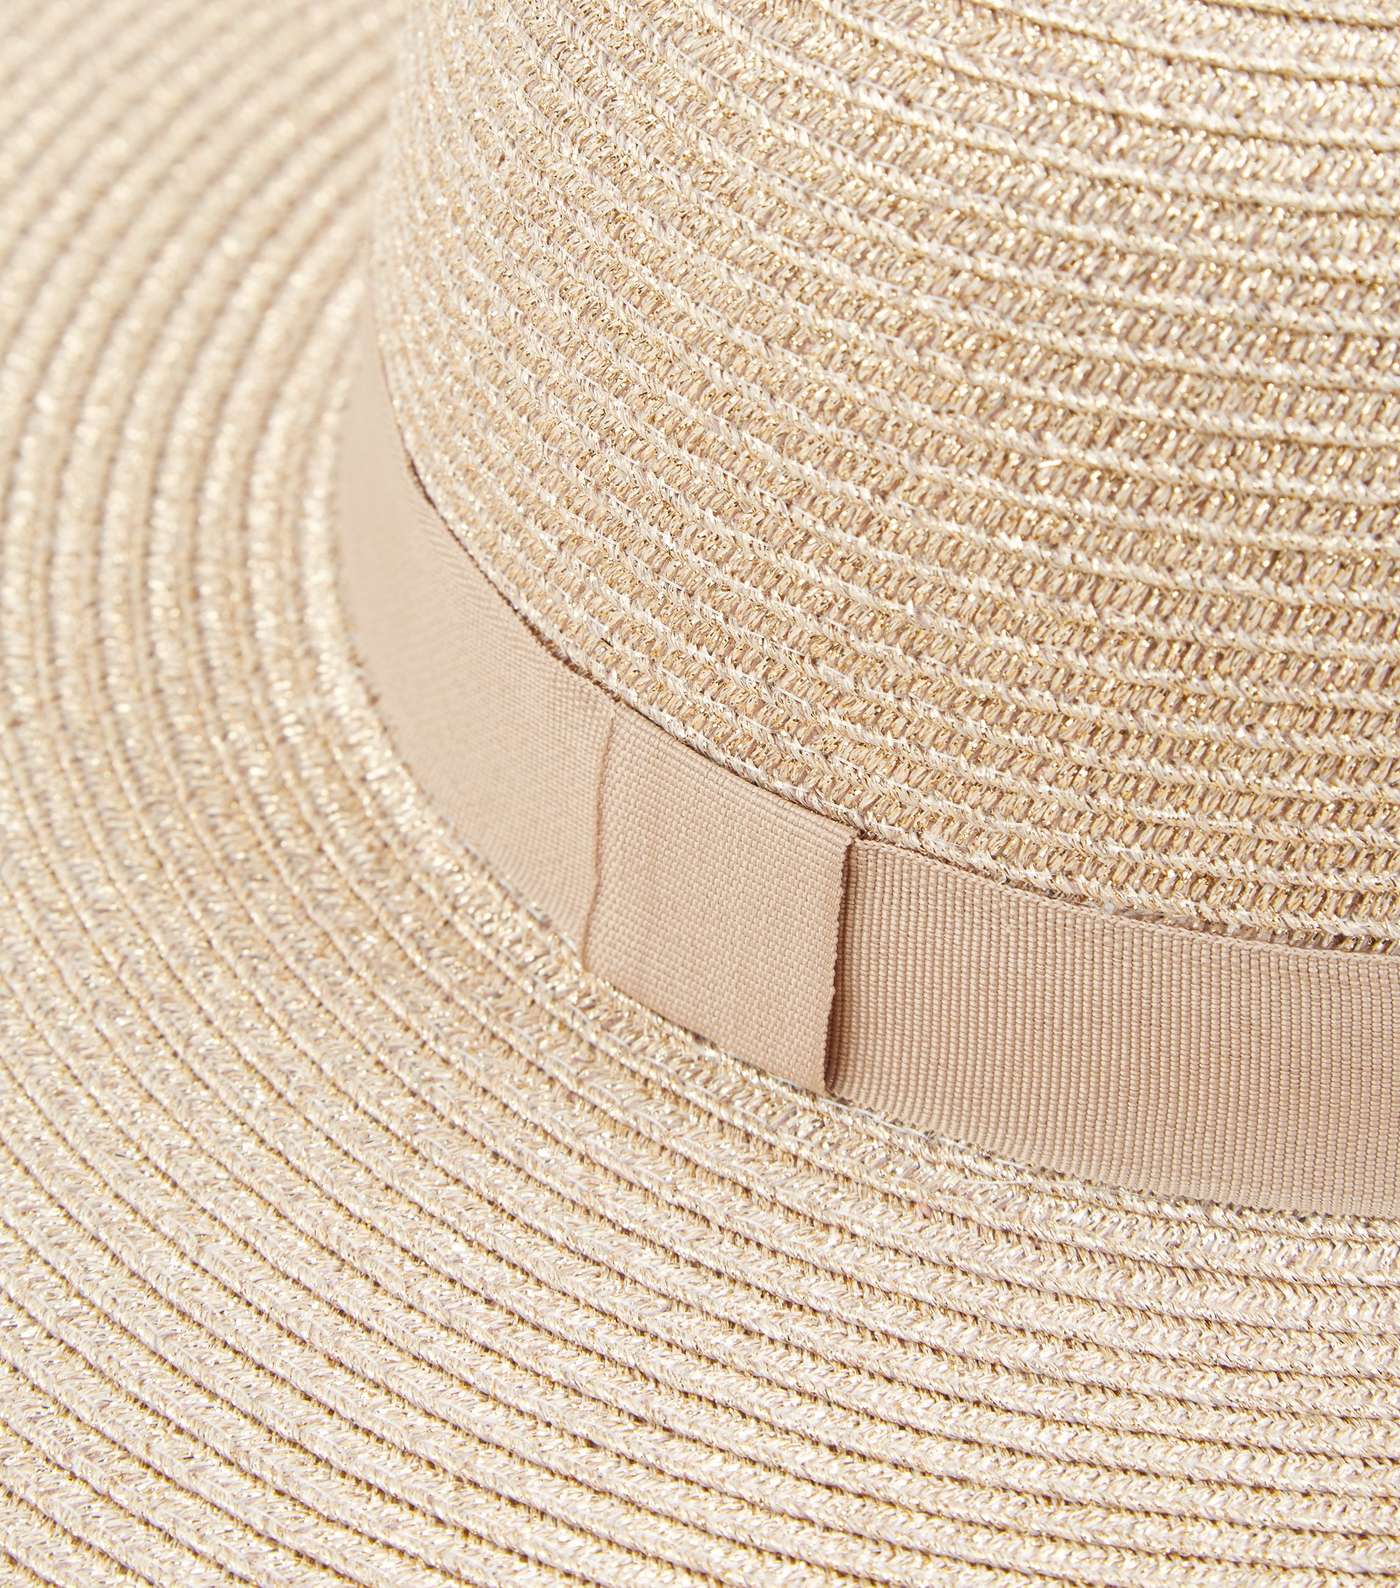 Rose Gold Woven Straw Effect Floppy Hat Image 3